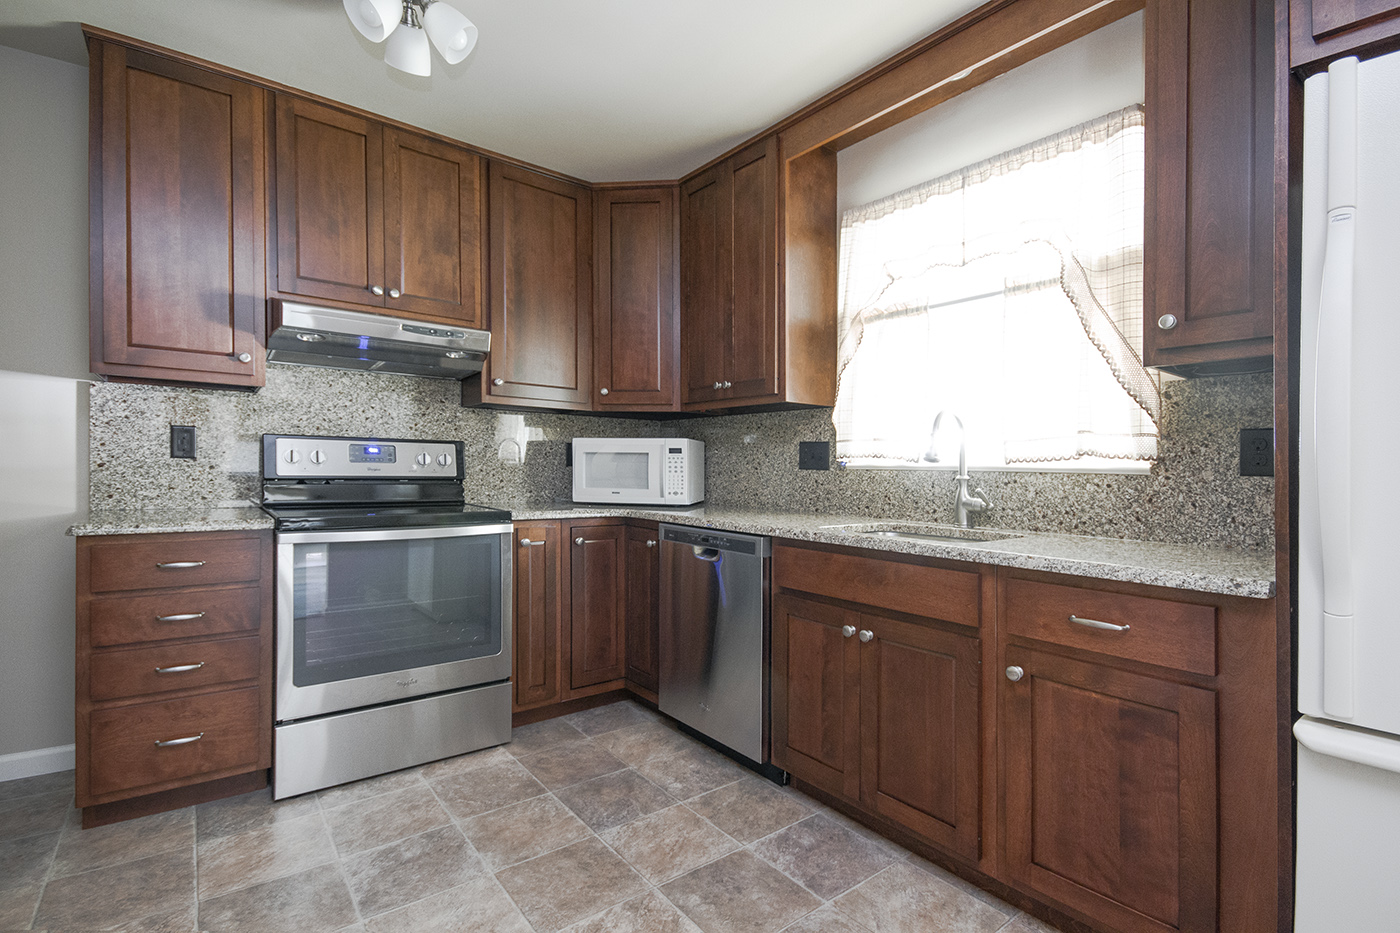 A kitchen after being remodeled.